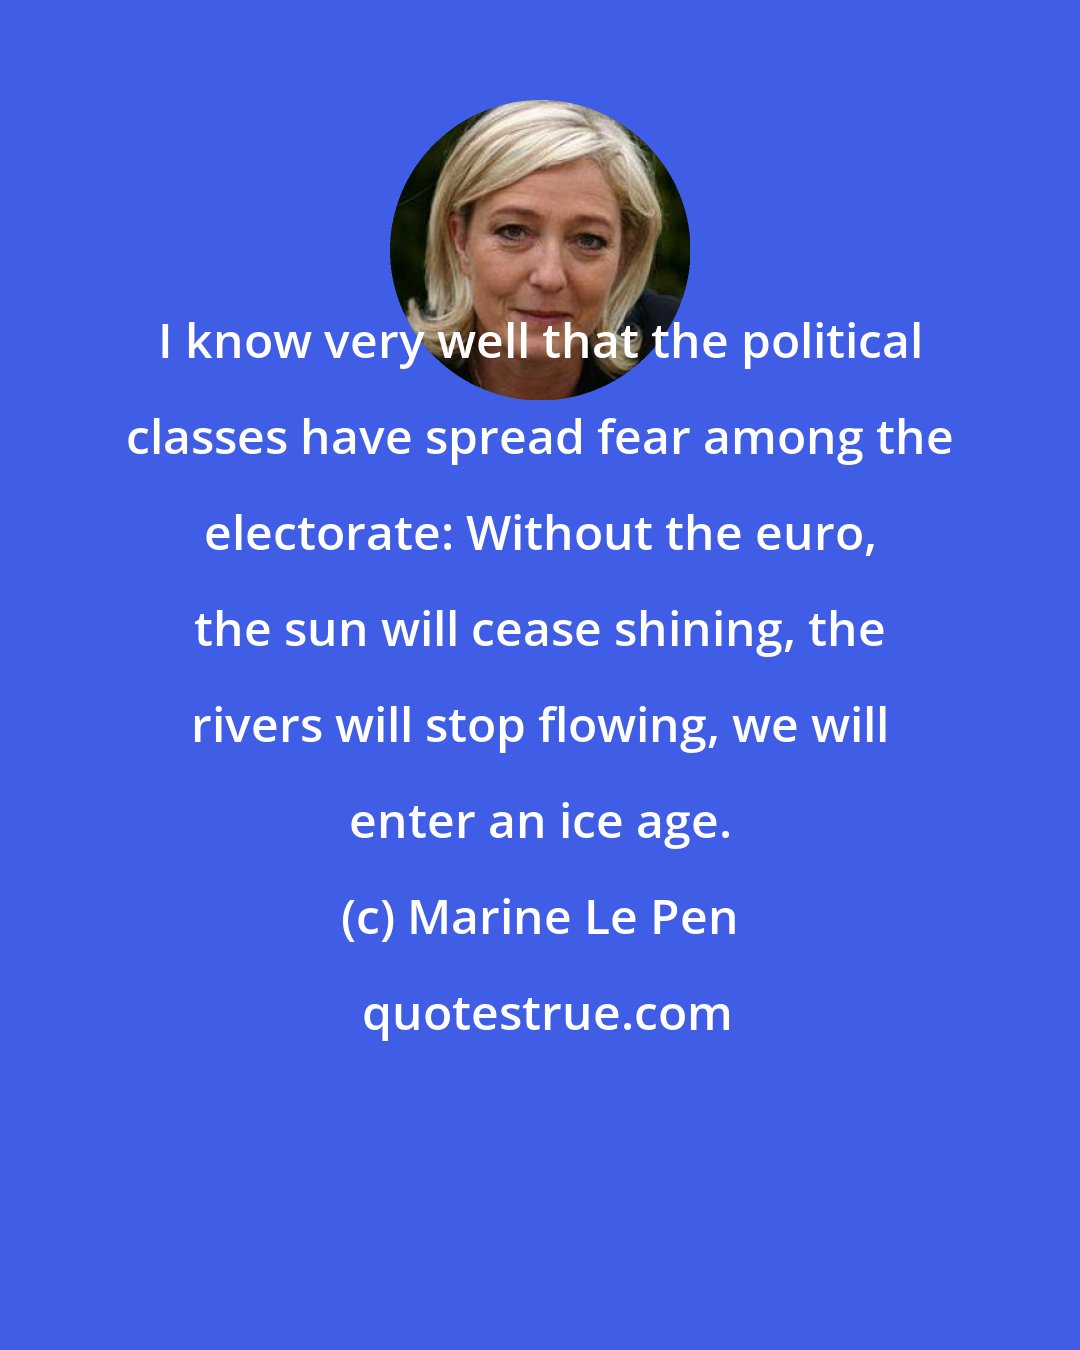 Marine Le Pen: I know very well that the political classes have spread fear among the electorate: Without the euro, the sun will cease shining, the rivers will stop flowing, we will enter an ice age.